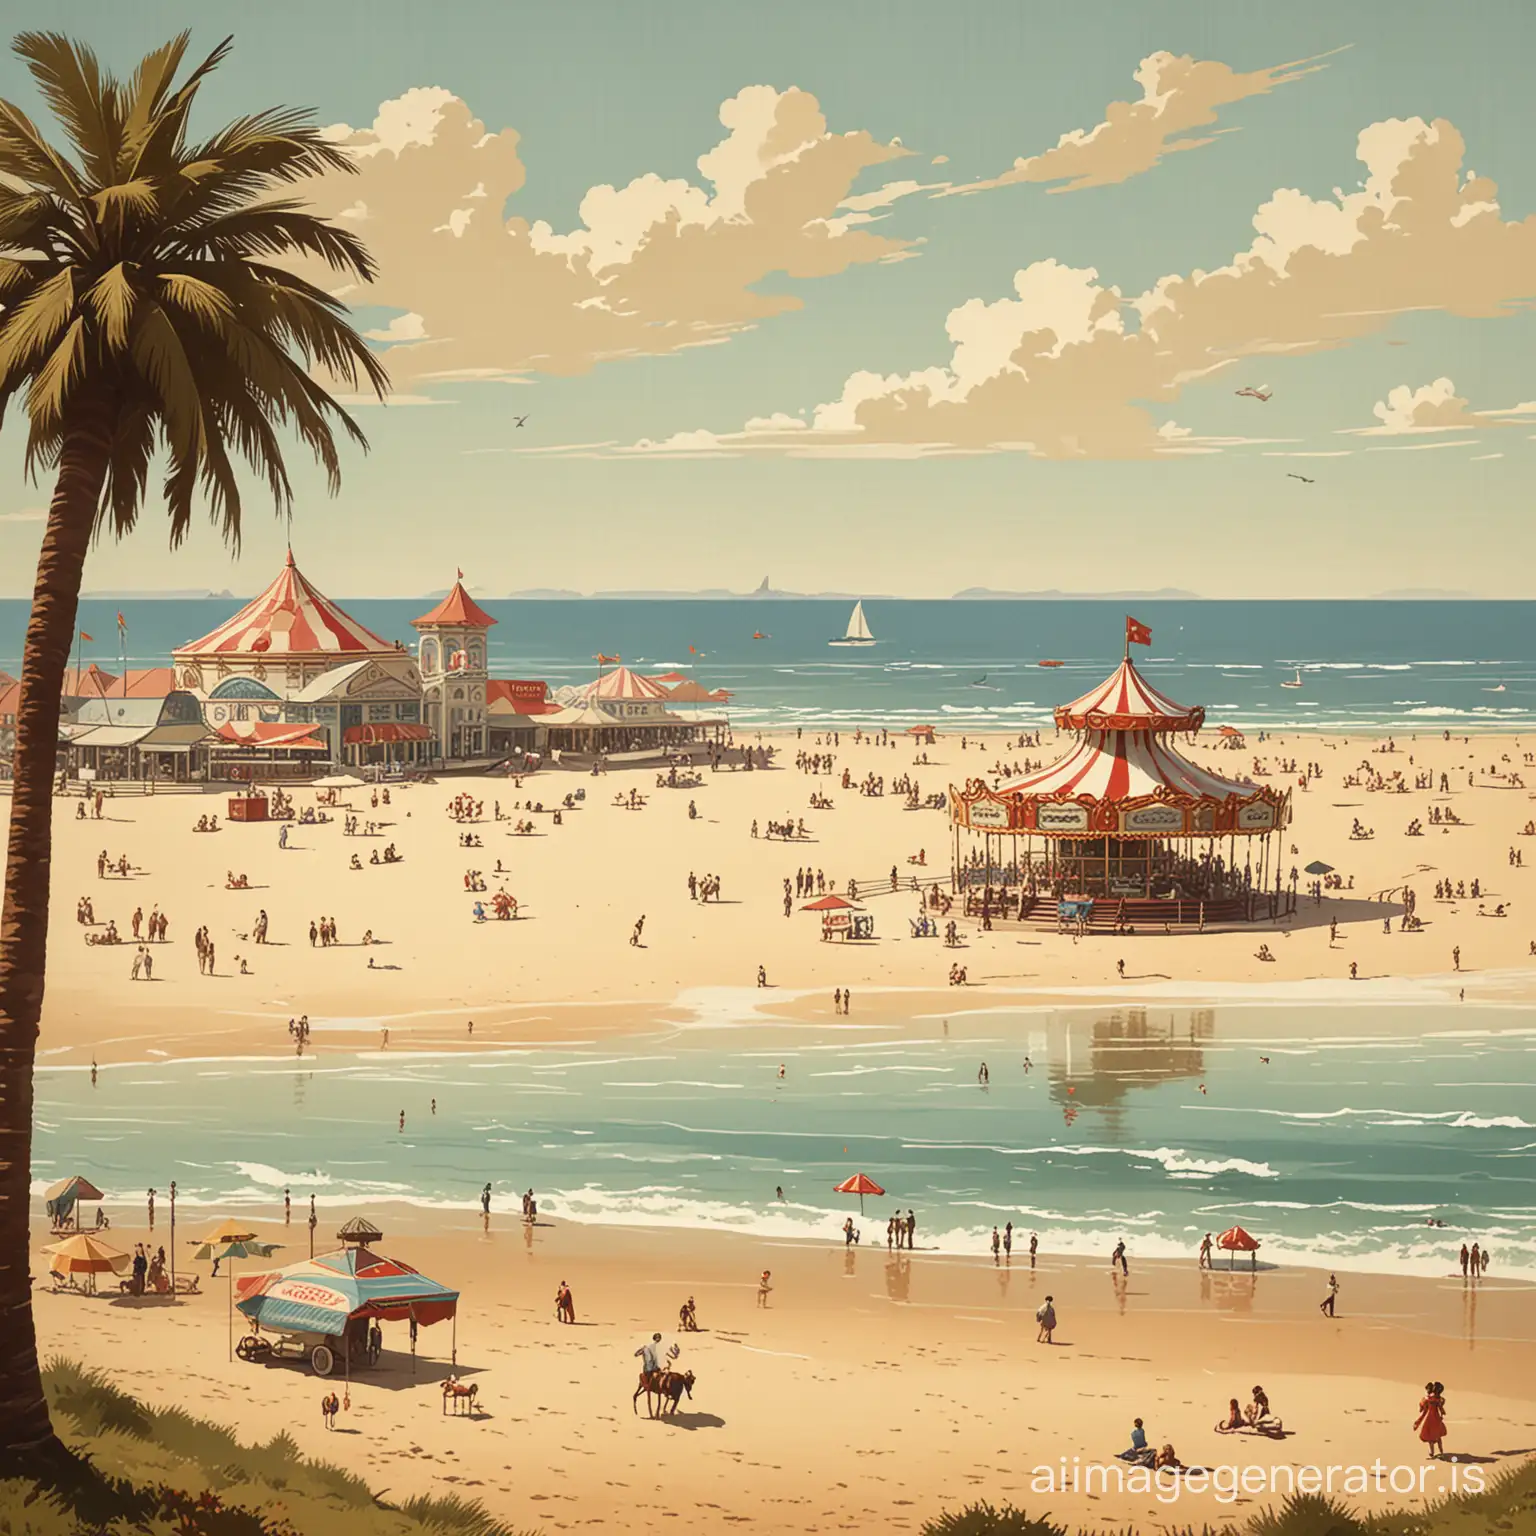 1920s-Beach-Scene-with-Vintage-Carousel-Poster-Style